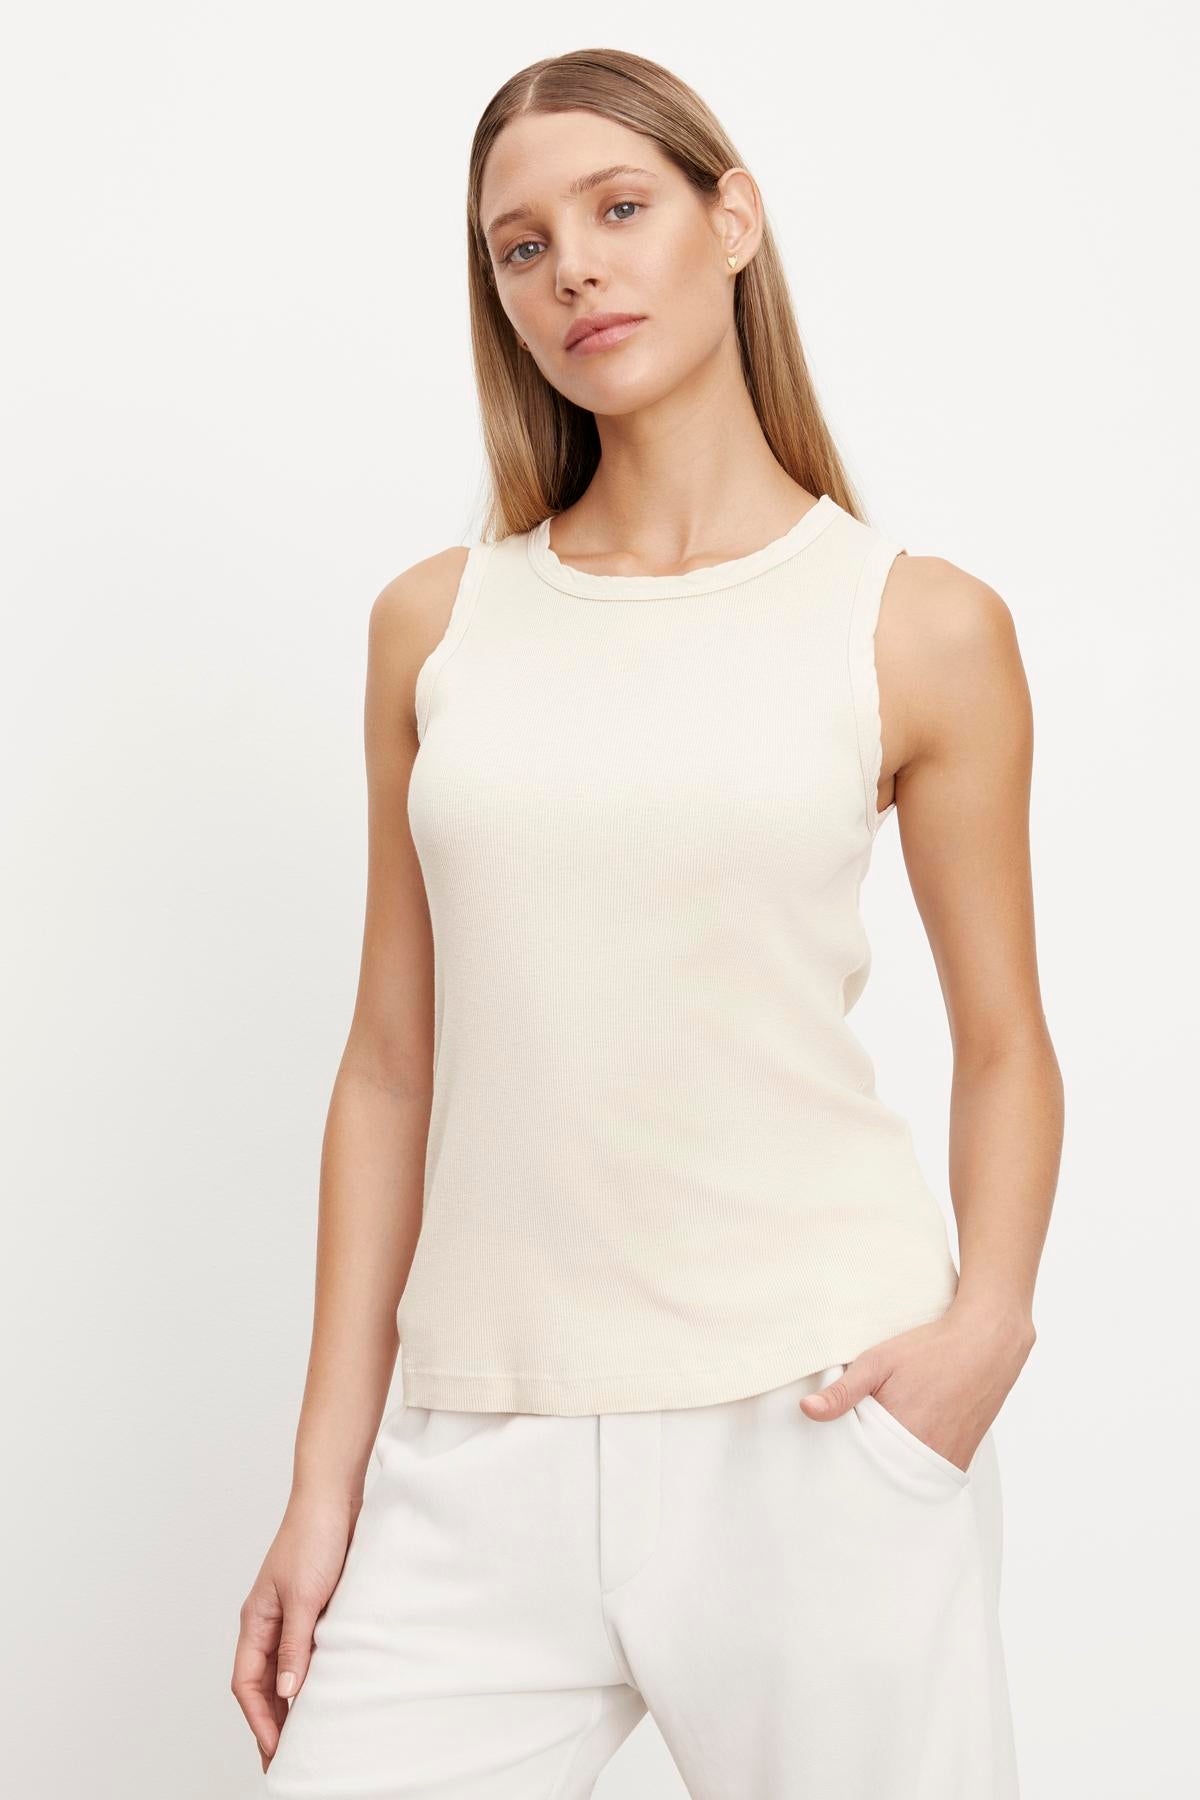 The fit model is wearing a MAXIE RIBBED TANK TOP from her closet and white pants.-35701956542657